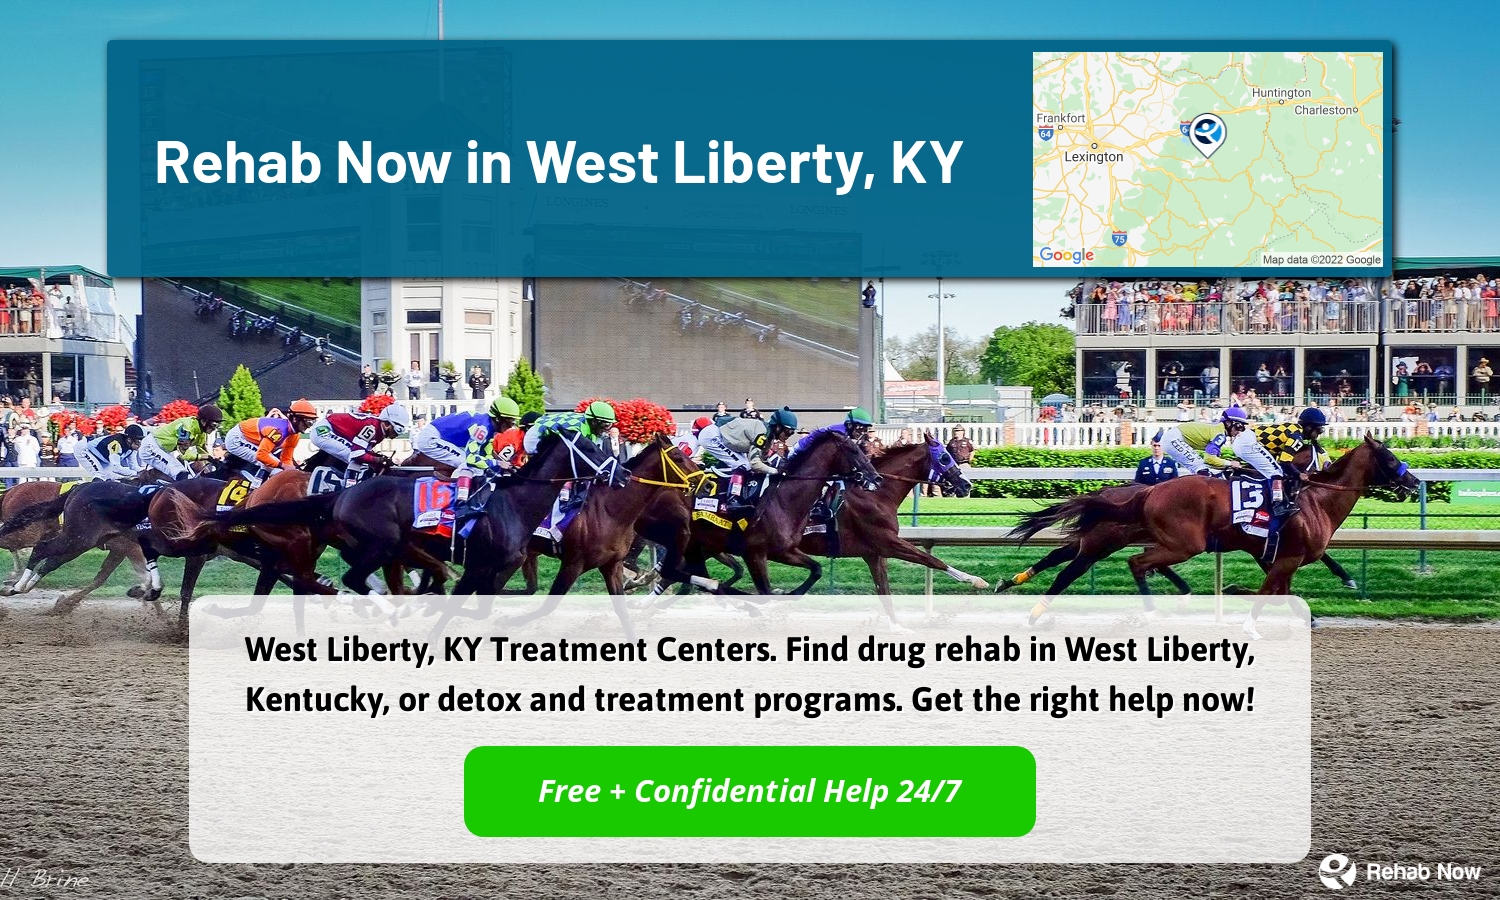 West Liberty, KY Treatment Centers. Find drug rehab in West Liberty, Kentucky, or detox and treatment programs. Get the right help now!